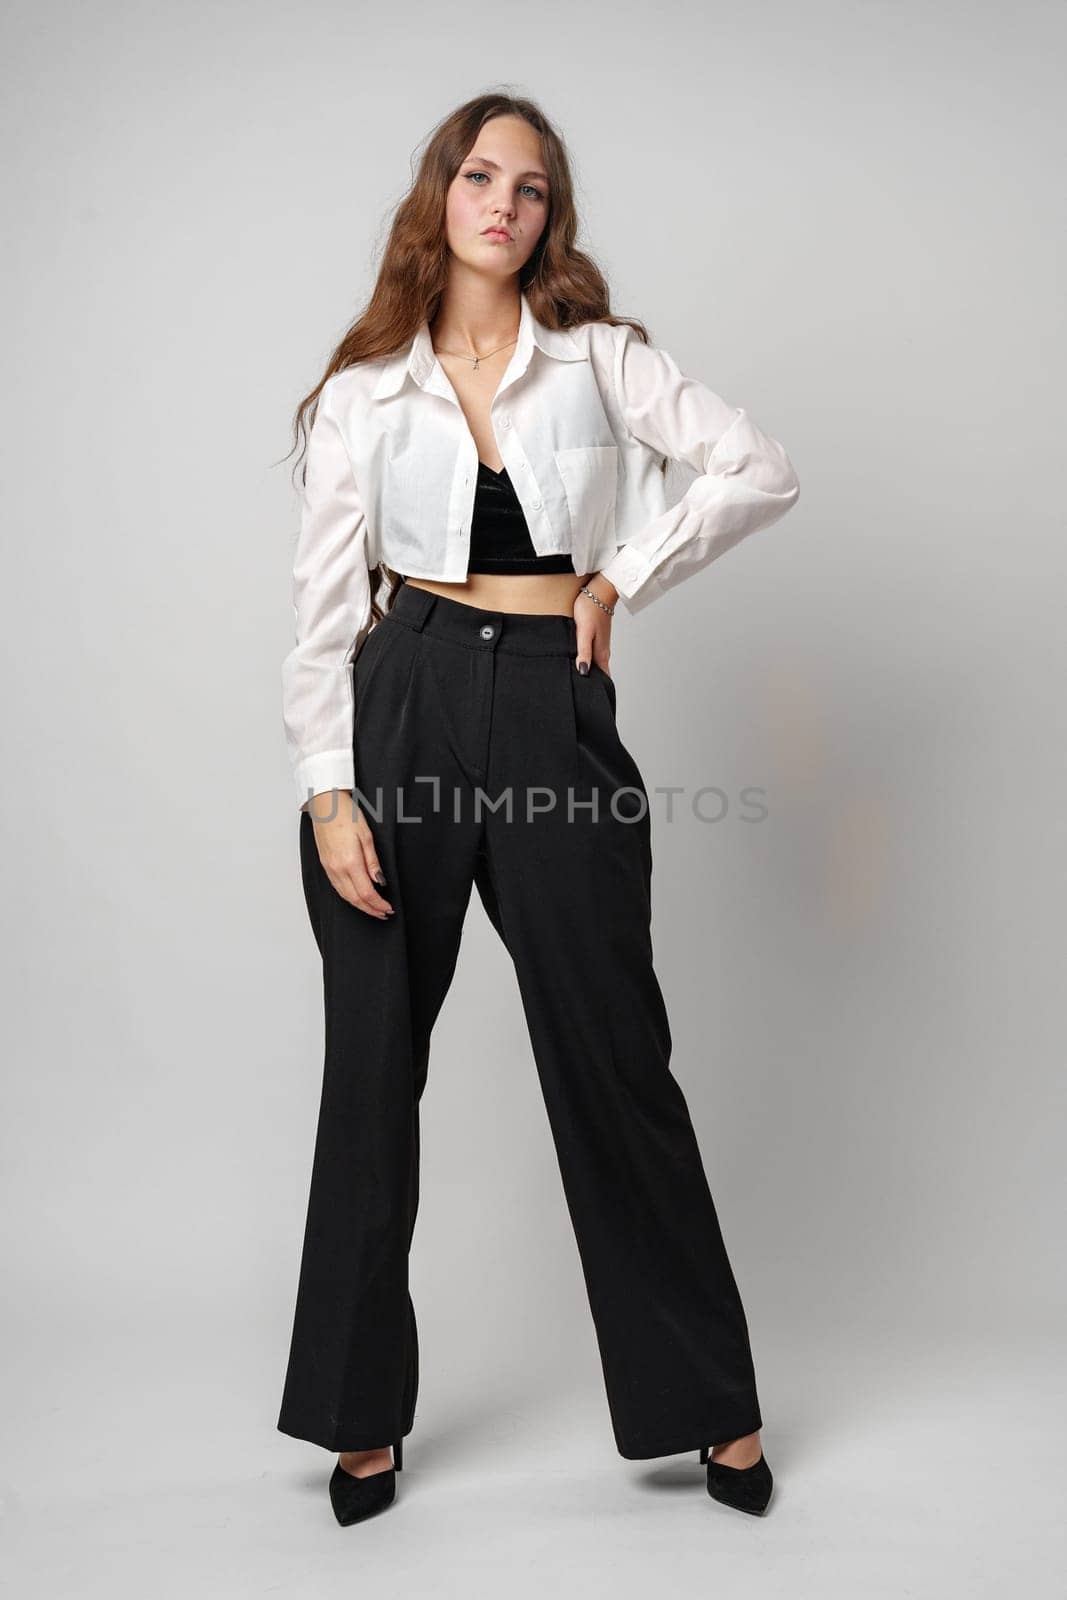 A young woman stands confidently with her hands on her hips, wearing a white blouse partially tucked into high-waisted black trousers, complemented by black heeled shoes. Her direct gaze and natural stance convey self-assurance and fashion sense.